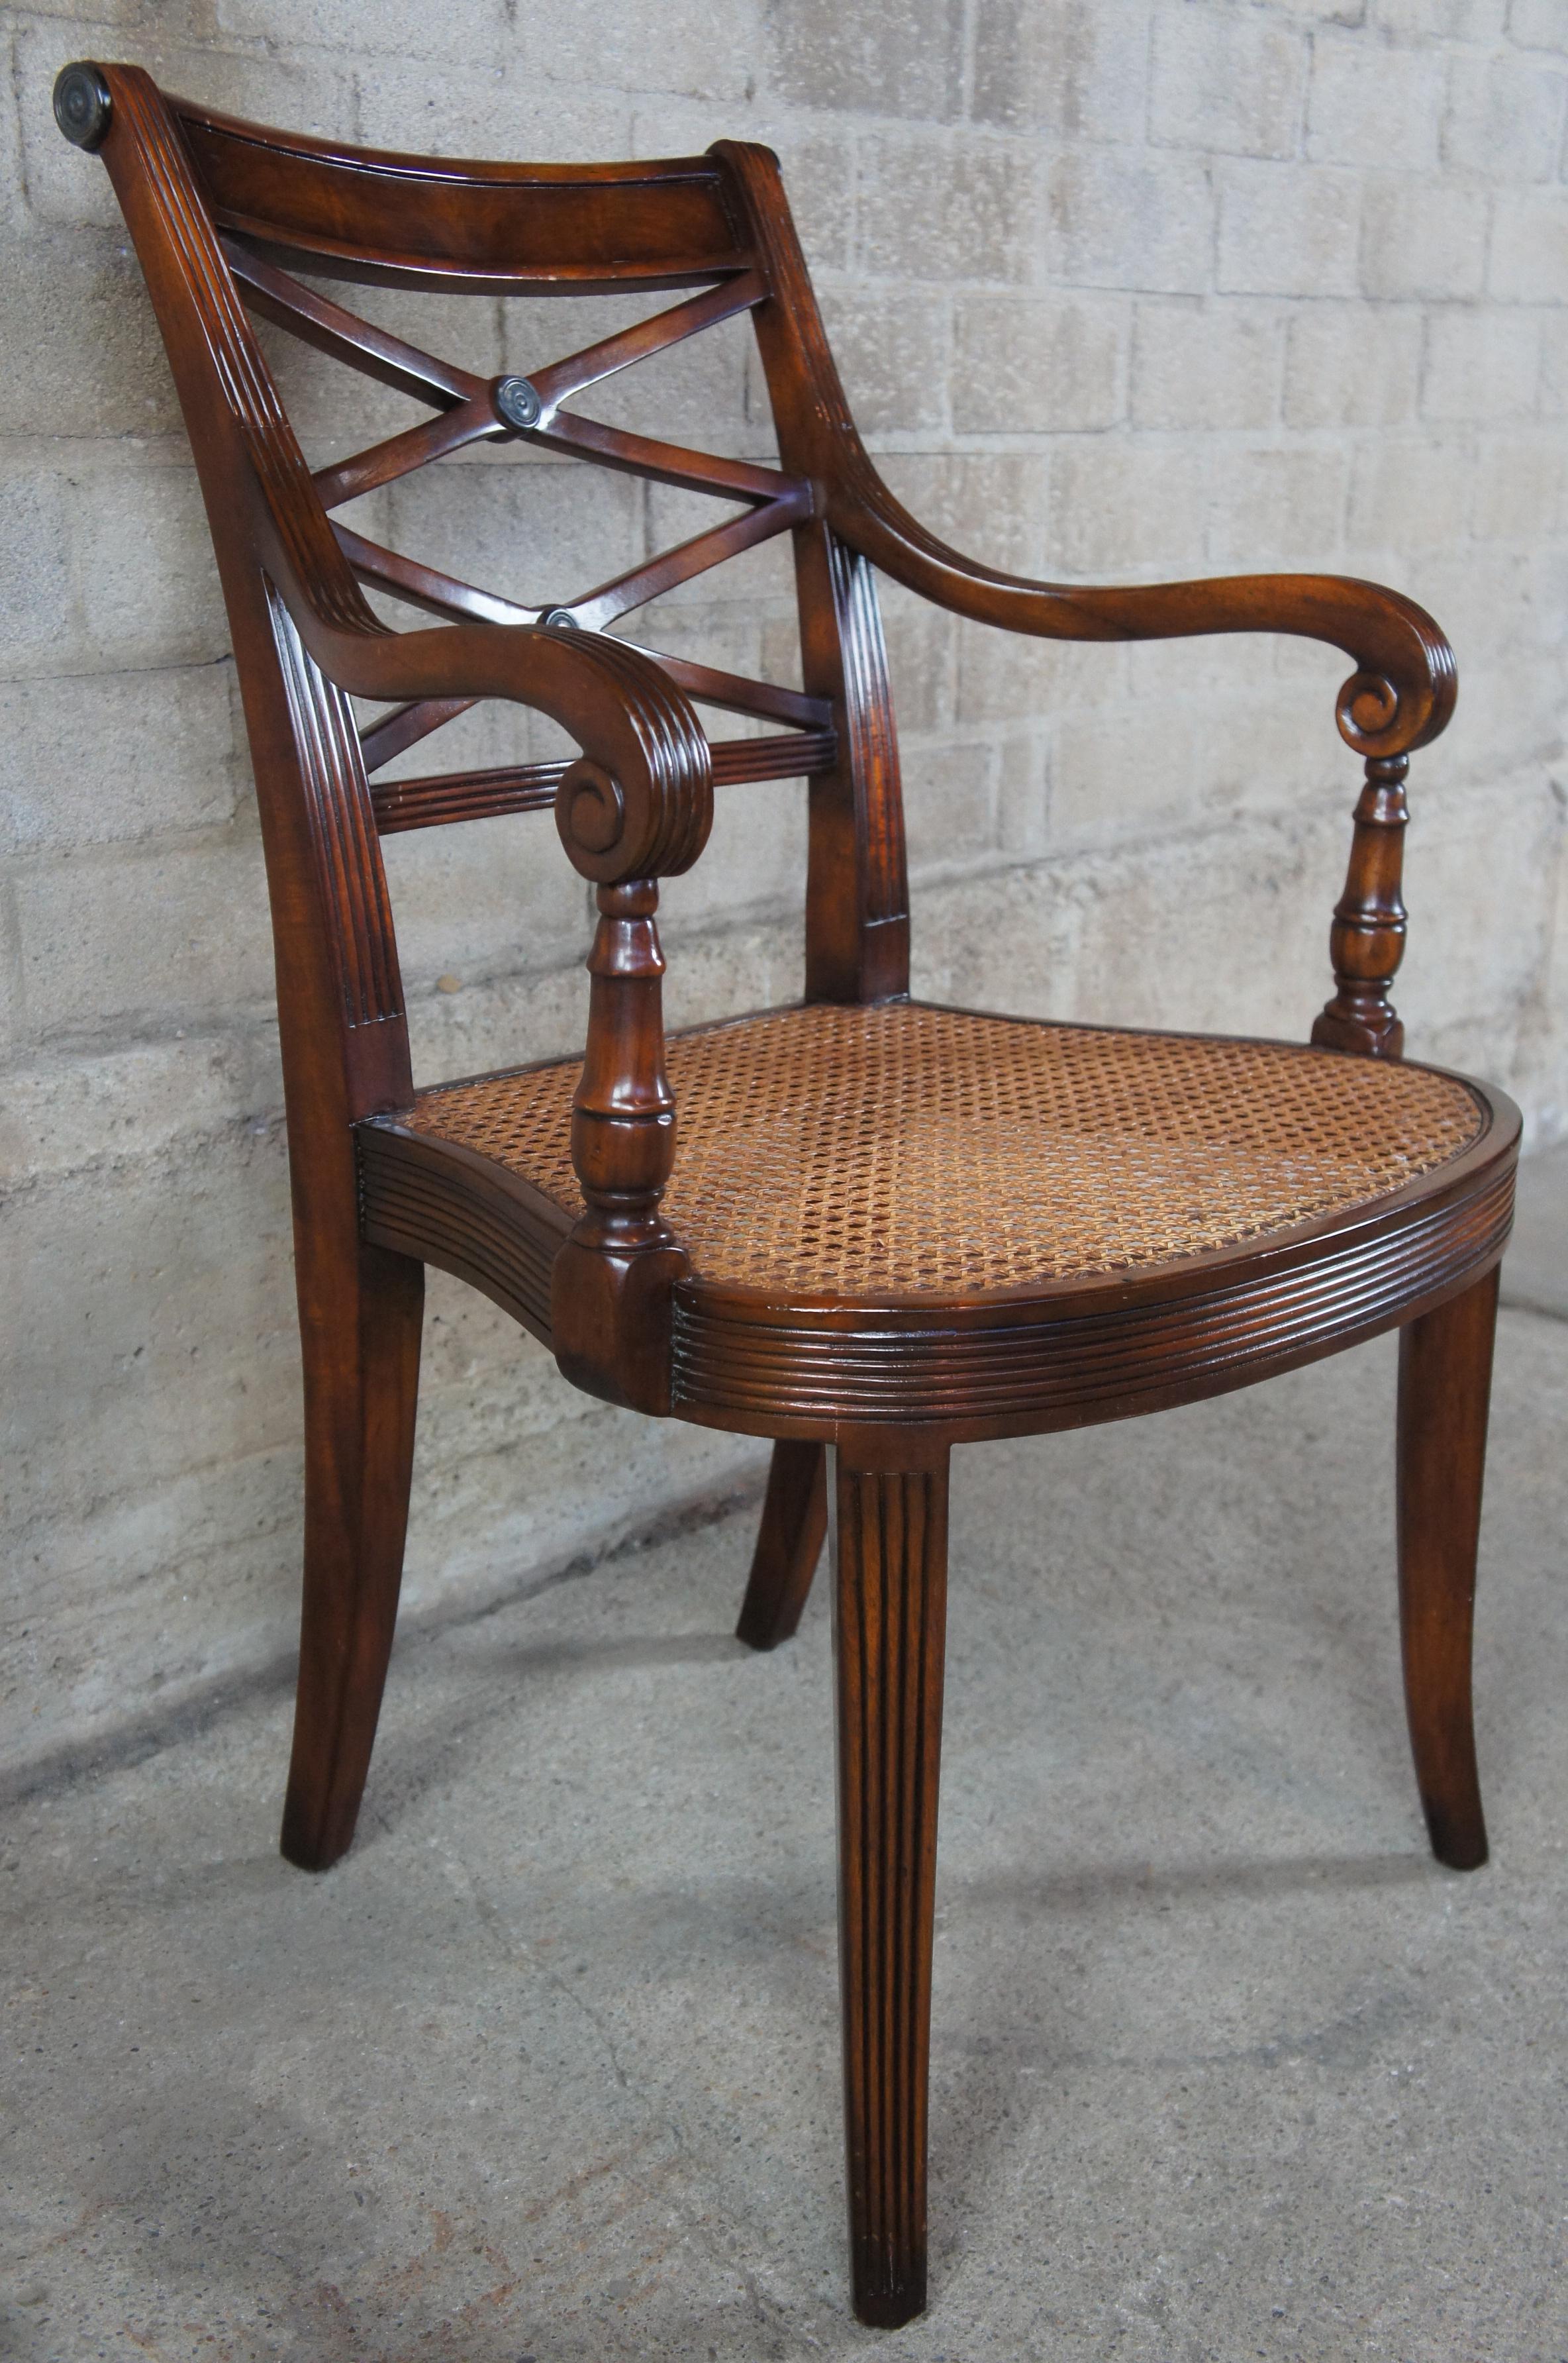 20th Century 8 Theodore Alexander Flamed Mahogany X Back Caned Regency Dining Chairs 4100-902